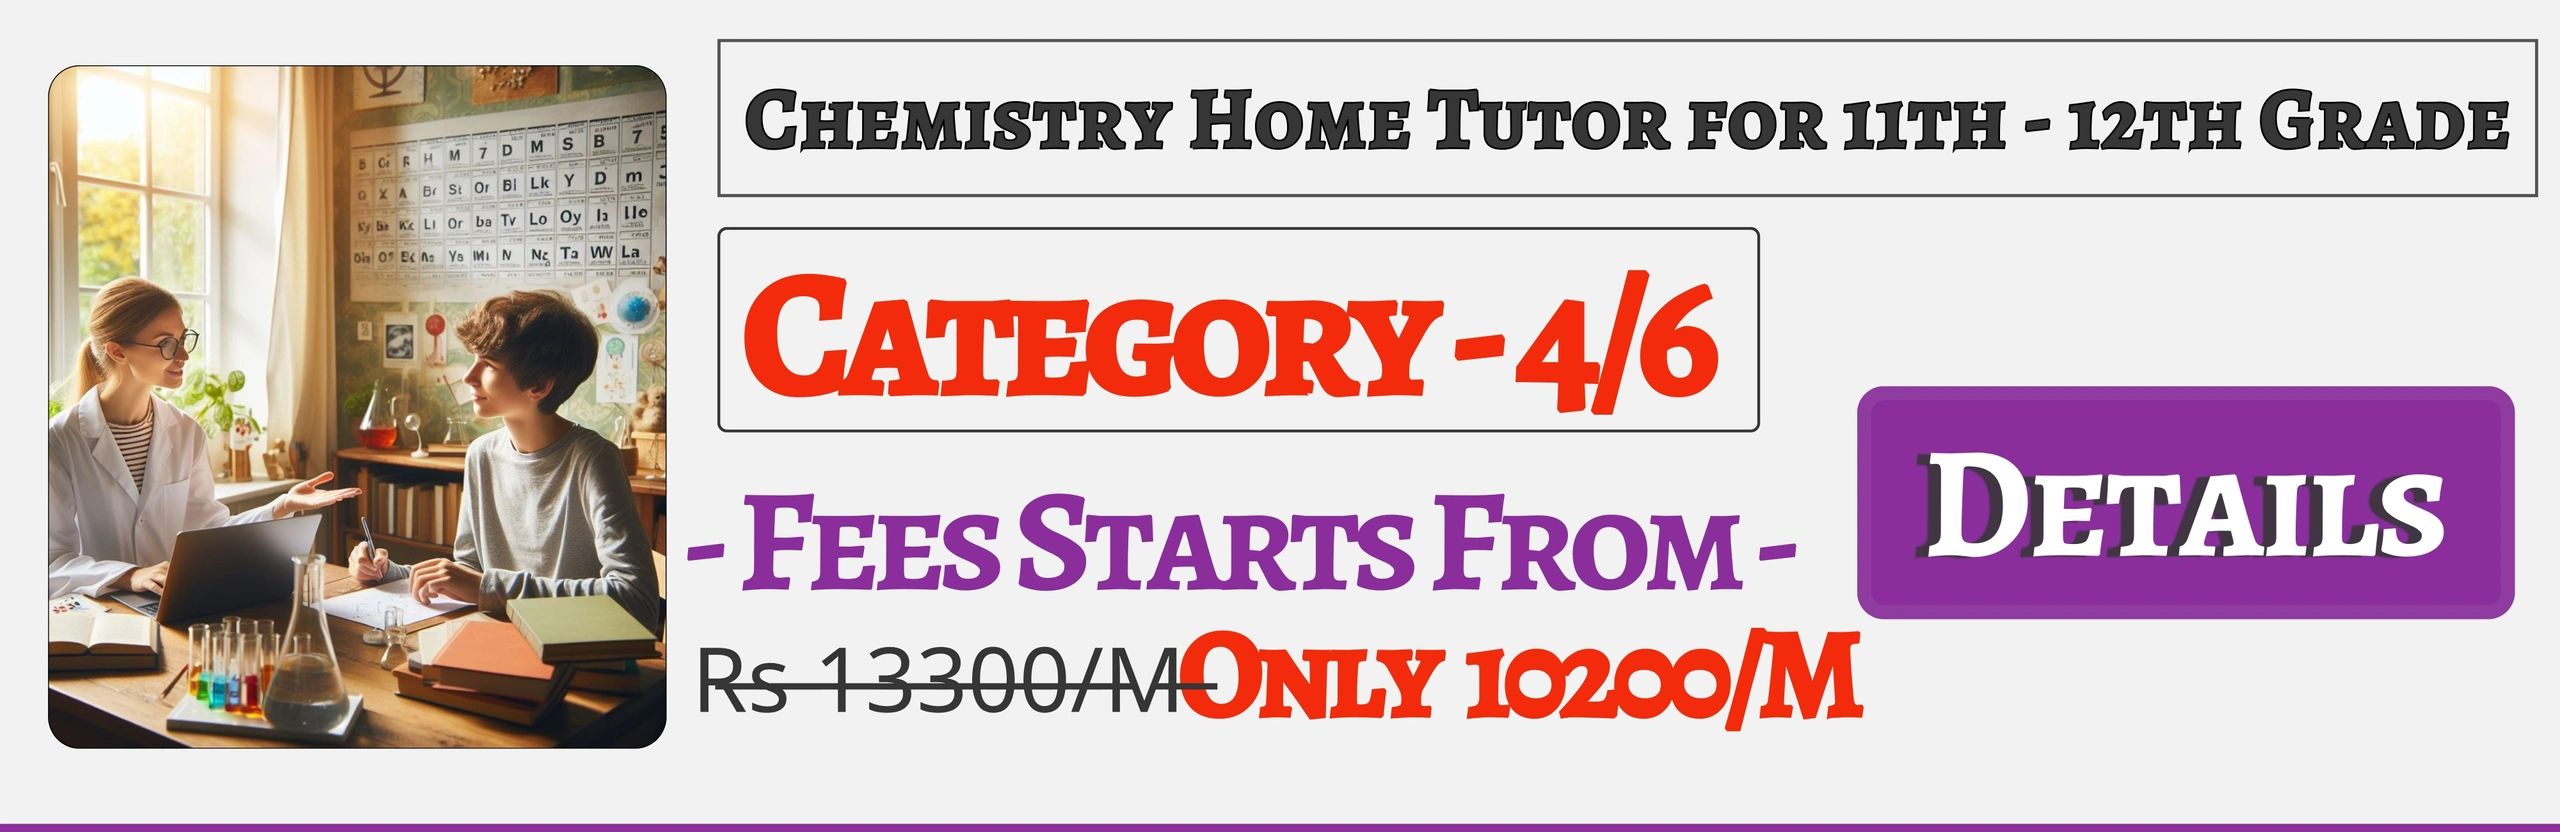 Book Best Nearby Chemistry Home Tuition Tutors For 11th & 12th In Jaipur , Fees Only 10200/M